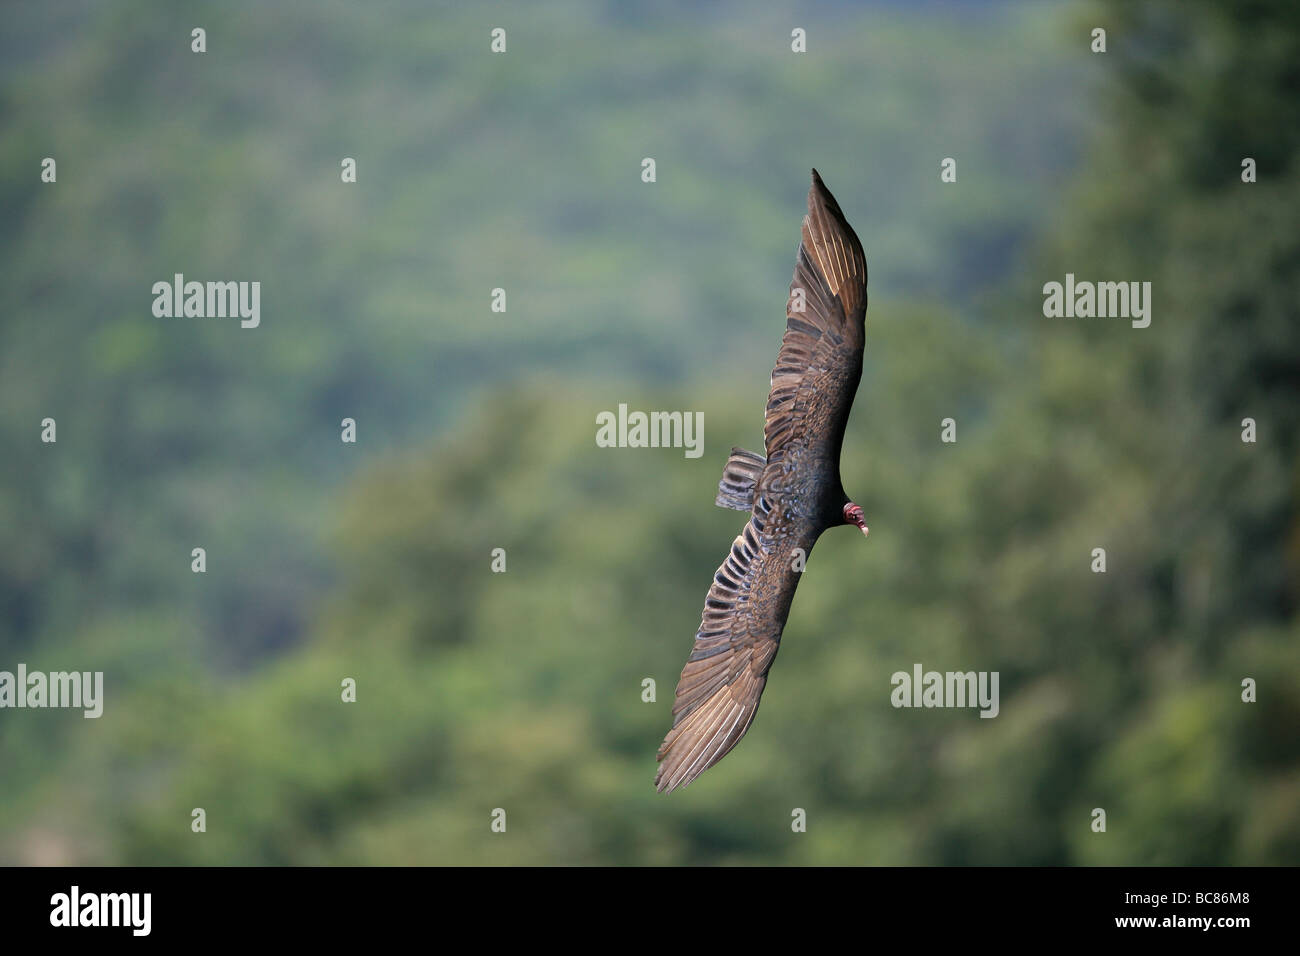 Turkey vulture, Cathartes aura, soaring over the rainforest in the interior of the Cocle province, Republic of Panama. Stock Photo